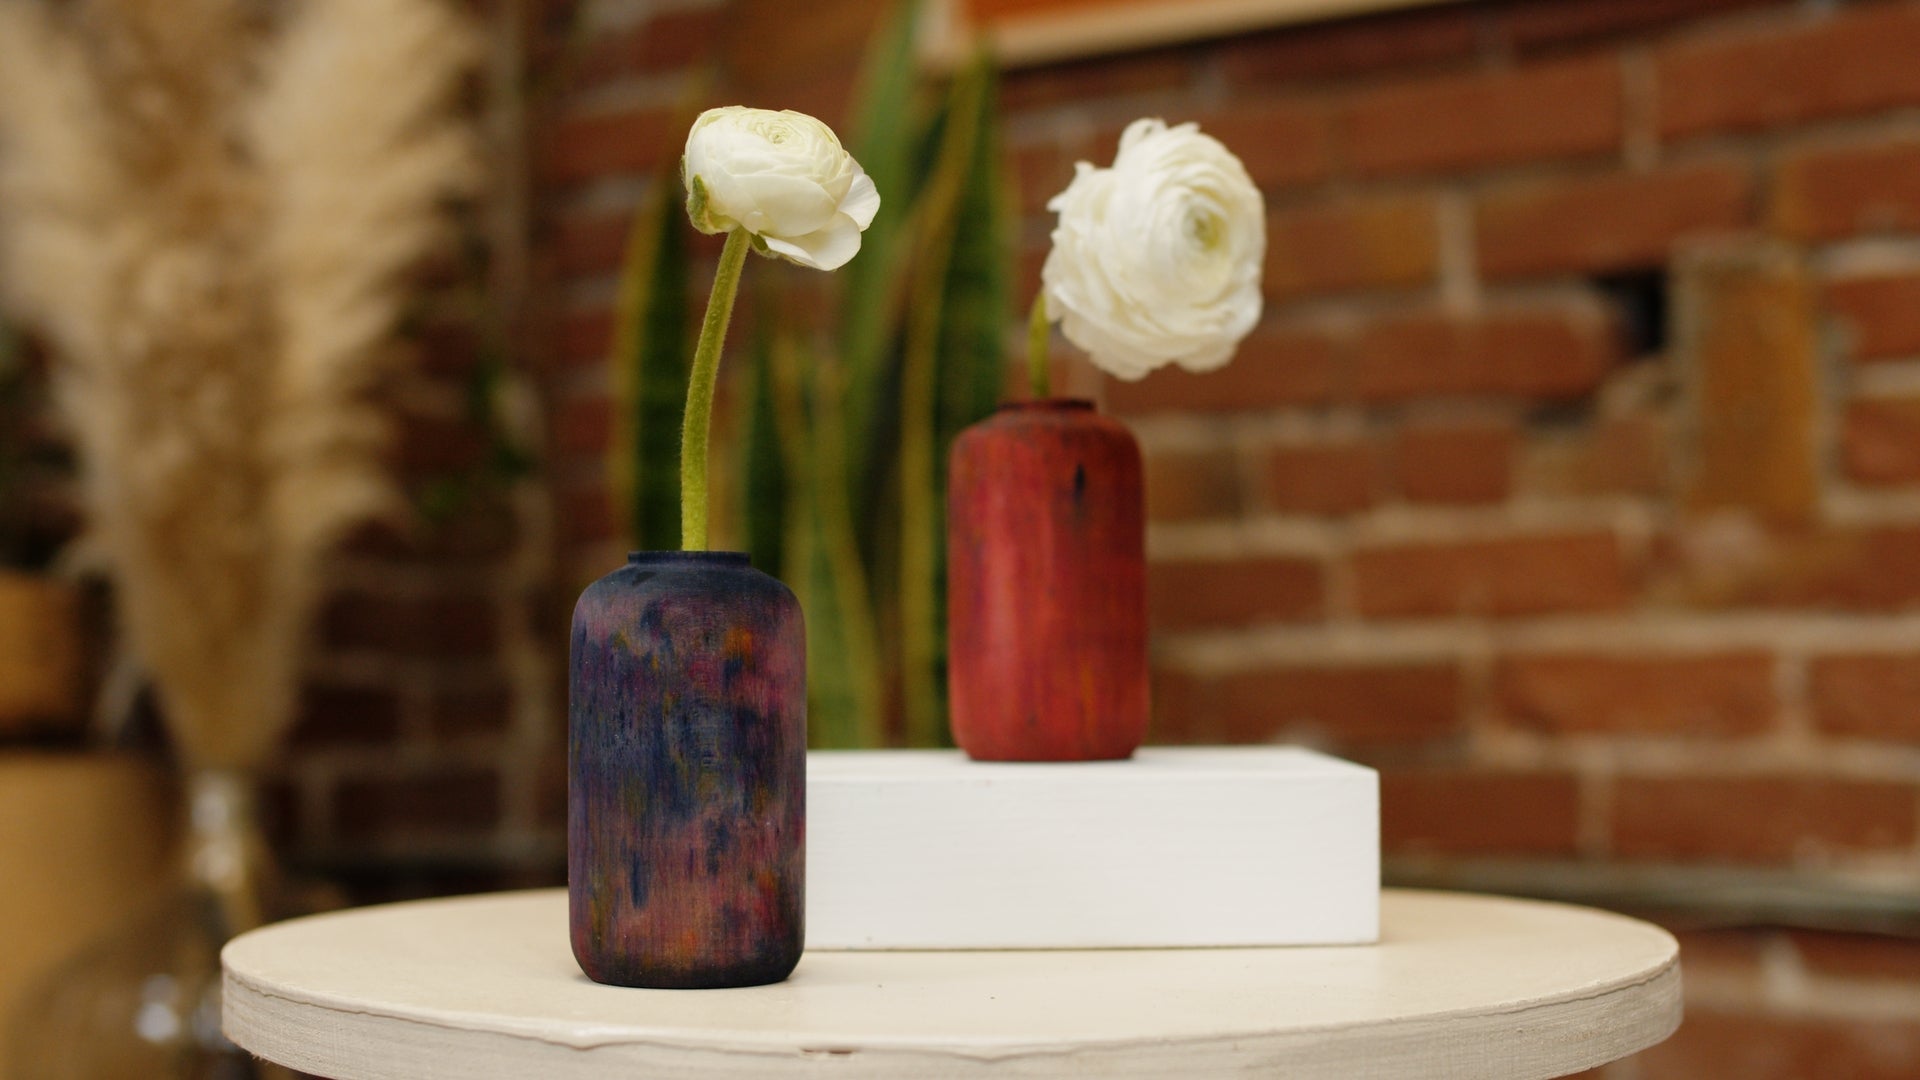 Our small maple vases dyed with our ice dye. Both midnight and crimson shown with a single white flower in each vase. By Melanie Abrantes Designs.